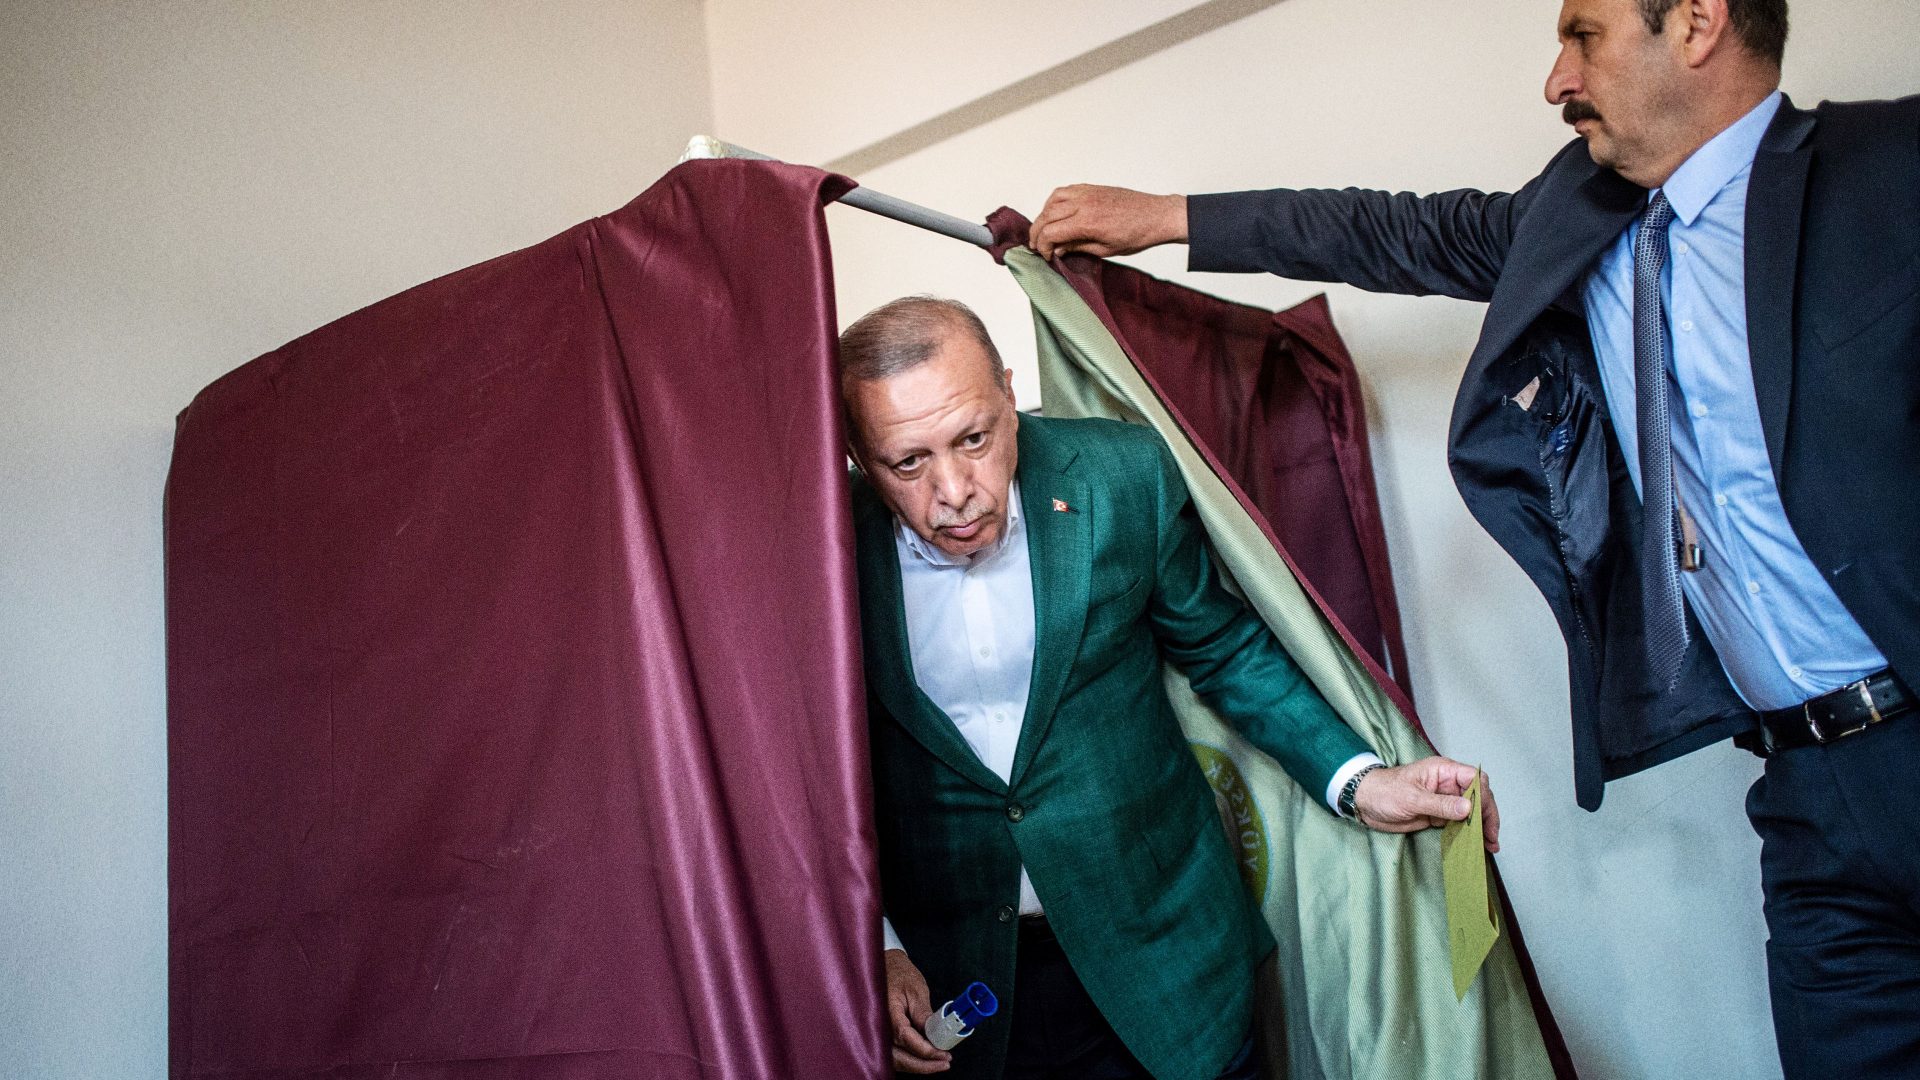 Turkish President Tayyip Erdogan (C) exits a polling booth prior to cast his ballot at a polling station during the municipal elections in 2019. Photo: BULENT KILIC/AFP via Getty Images